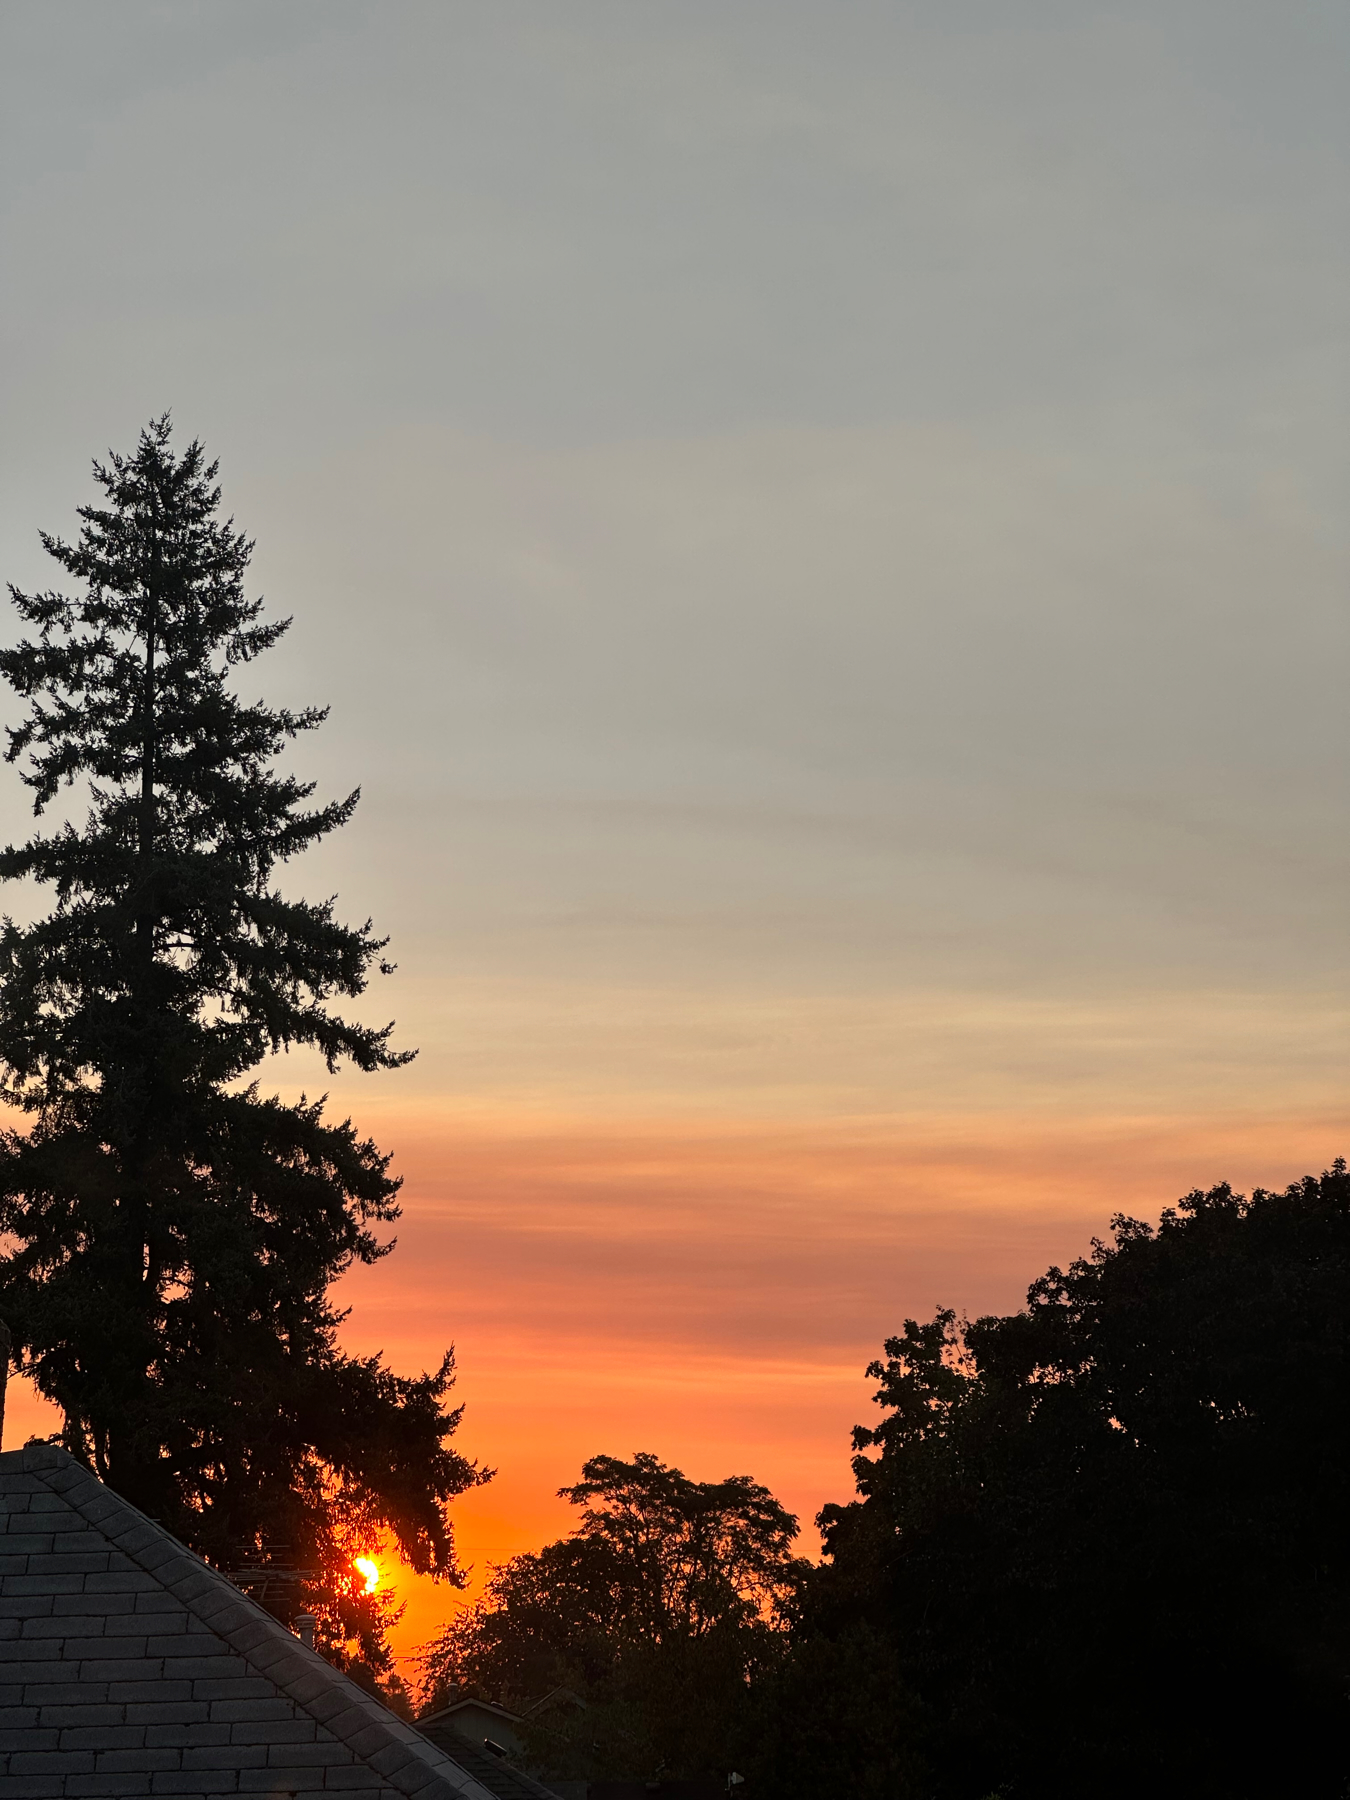 View of a sunrise with a silhouette of a trees and the roof of a house in the foreground.